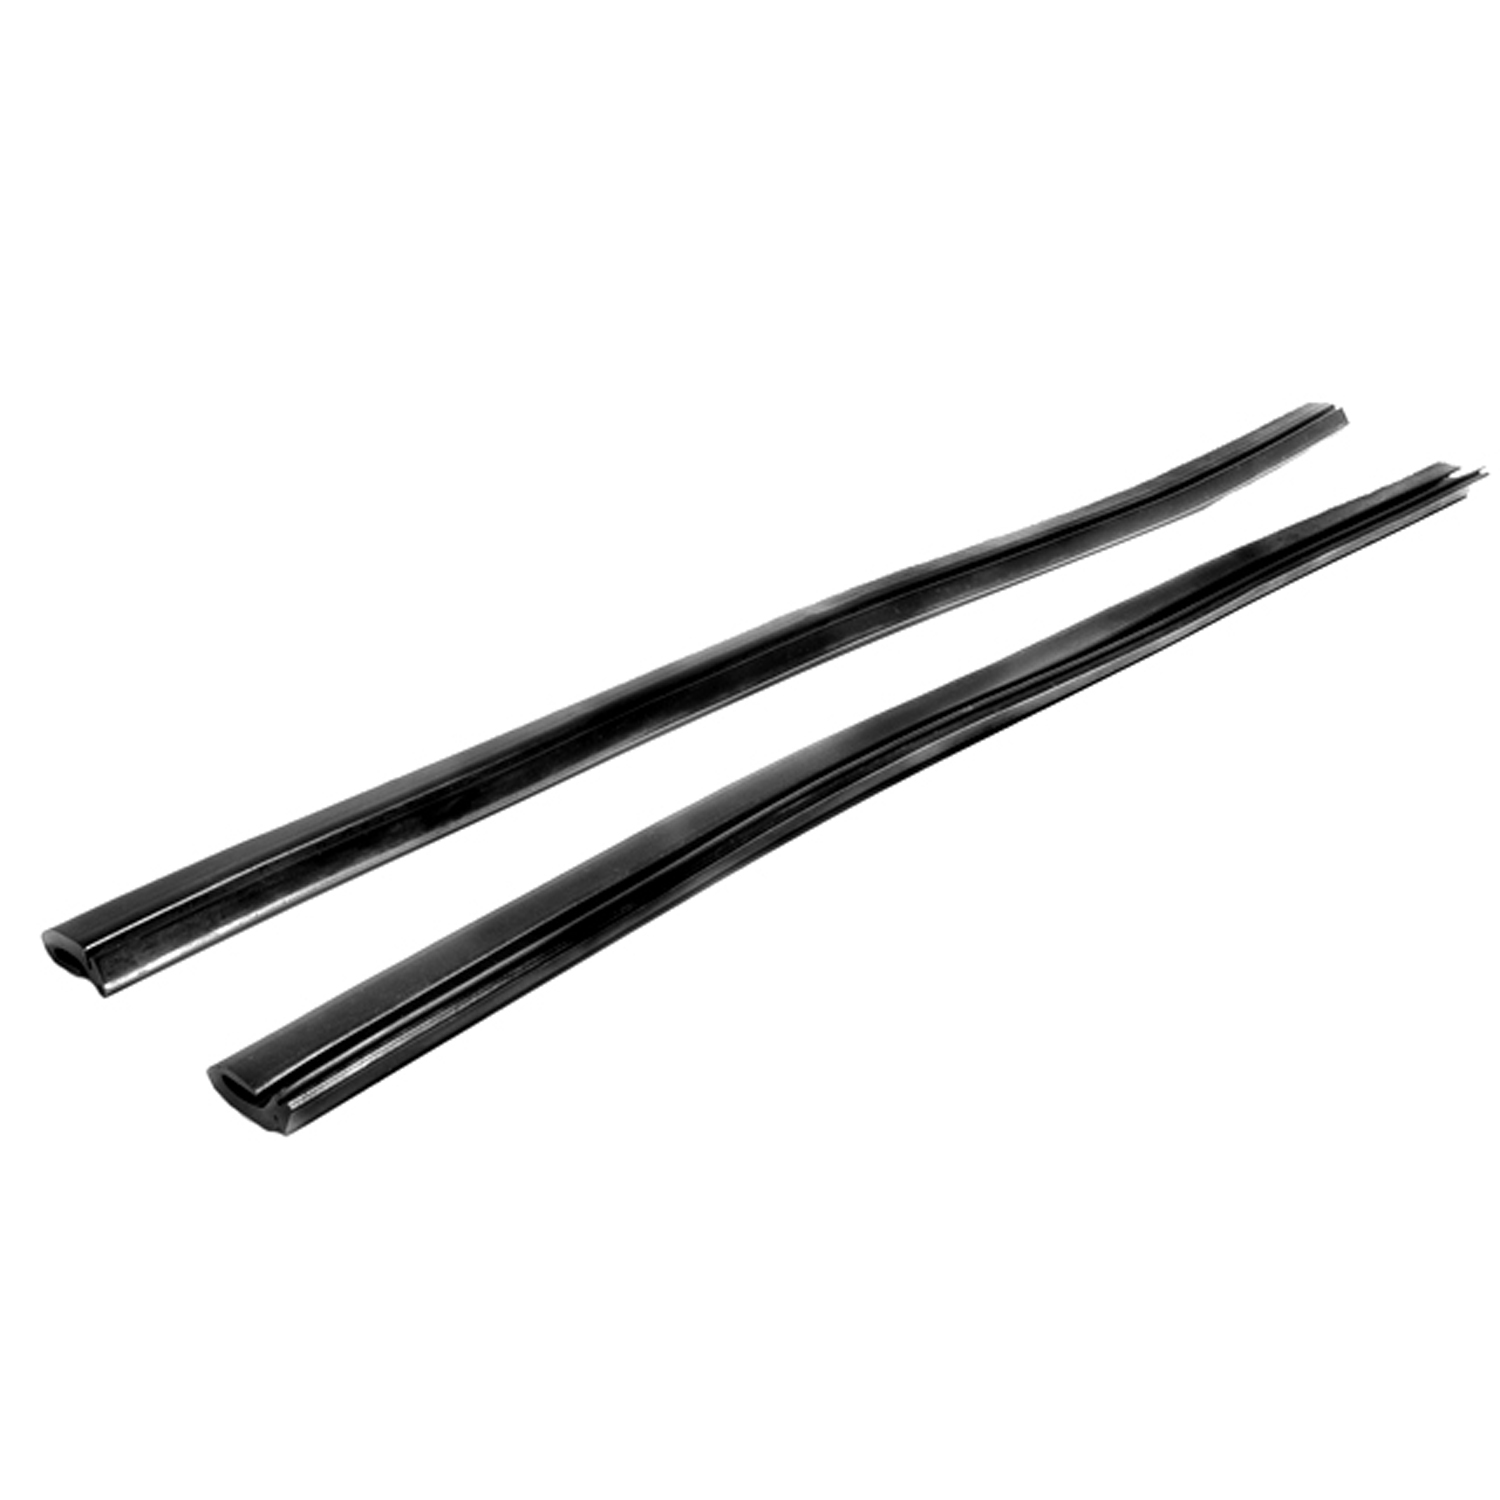 1967 Ford Falcon Rear Side Roll-Up Window Seal, for Hardtops and Convertibles-VS 3